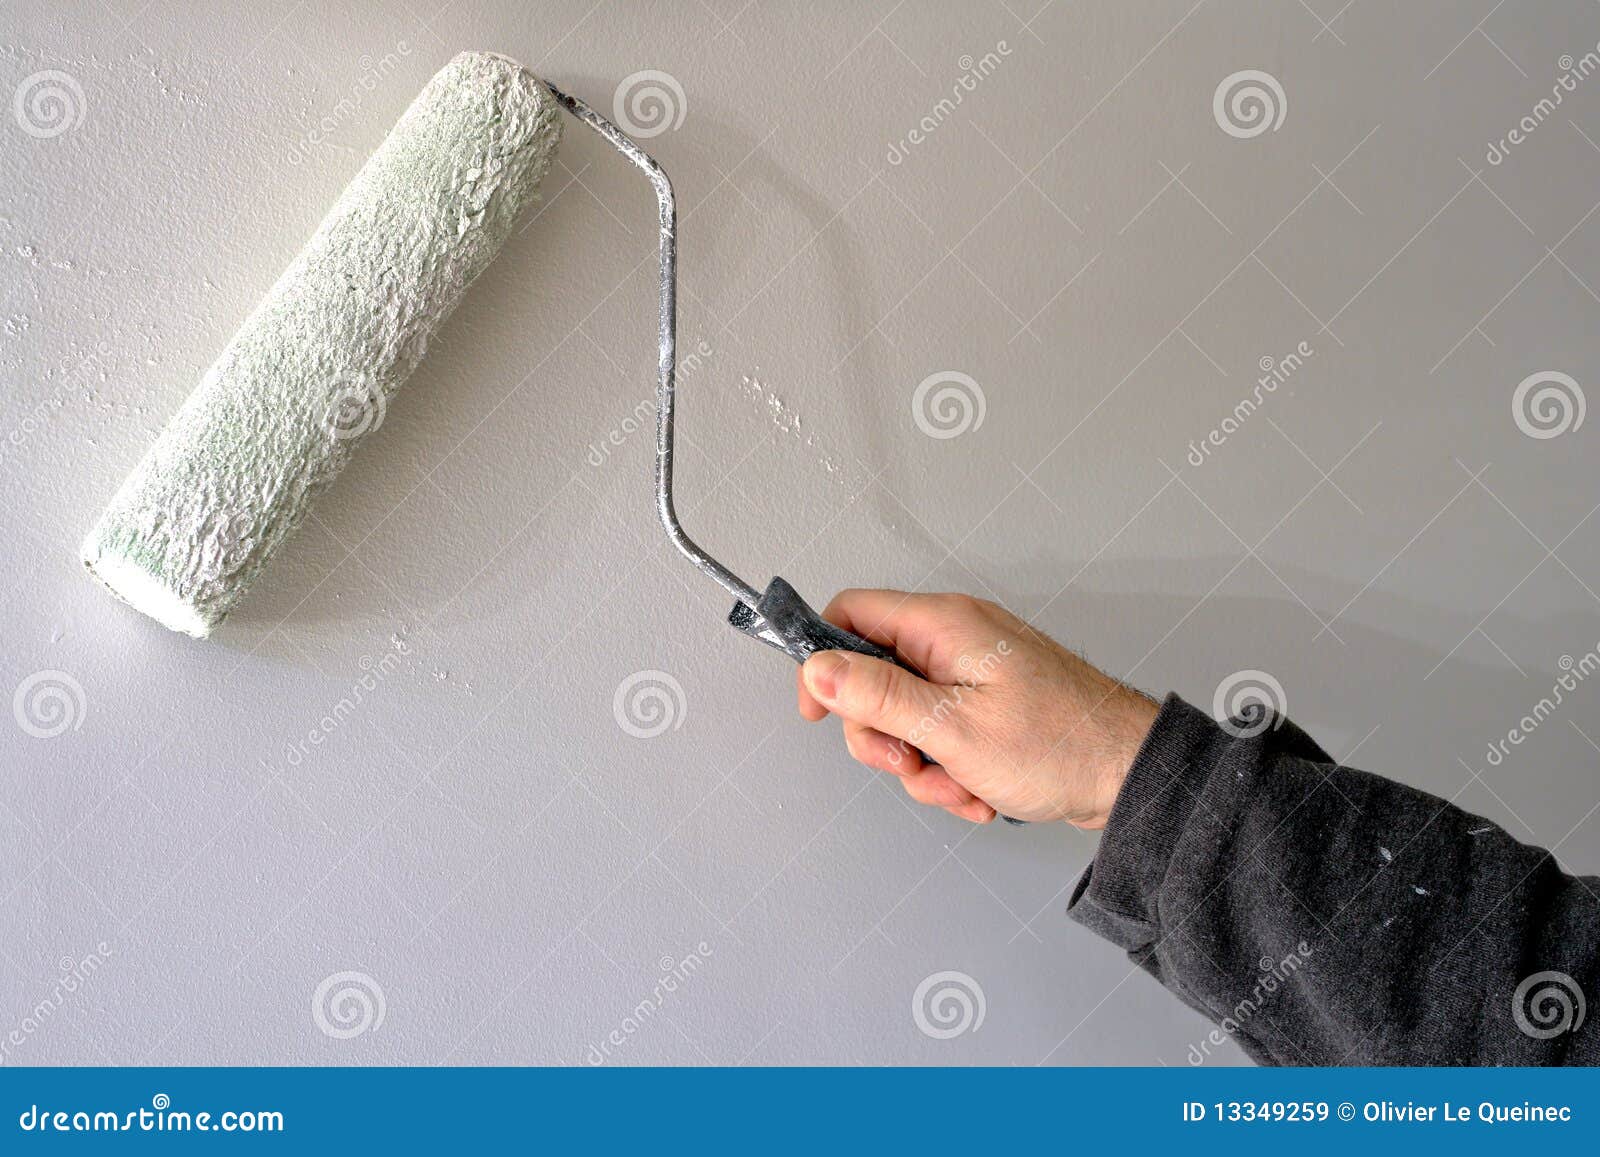 Painter Painting A House Wall With A Paint Roller Royalty Free ...